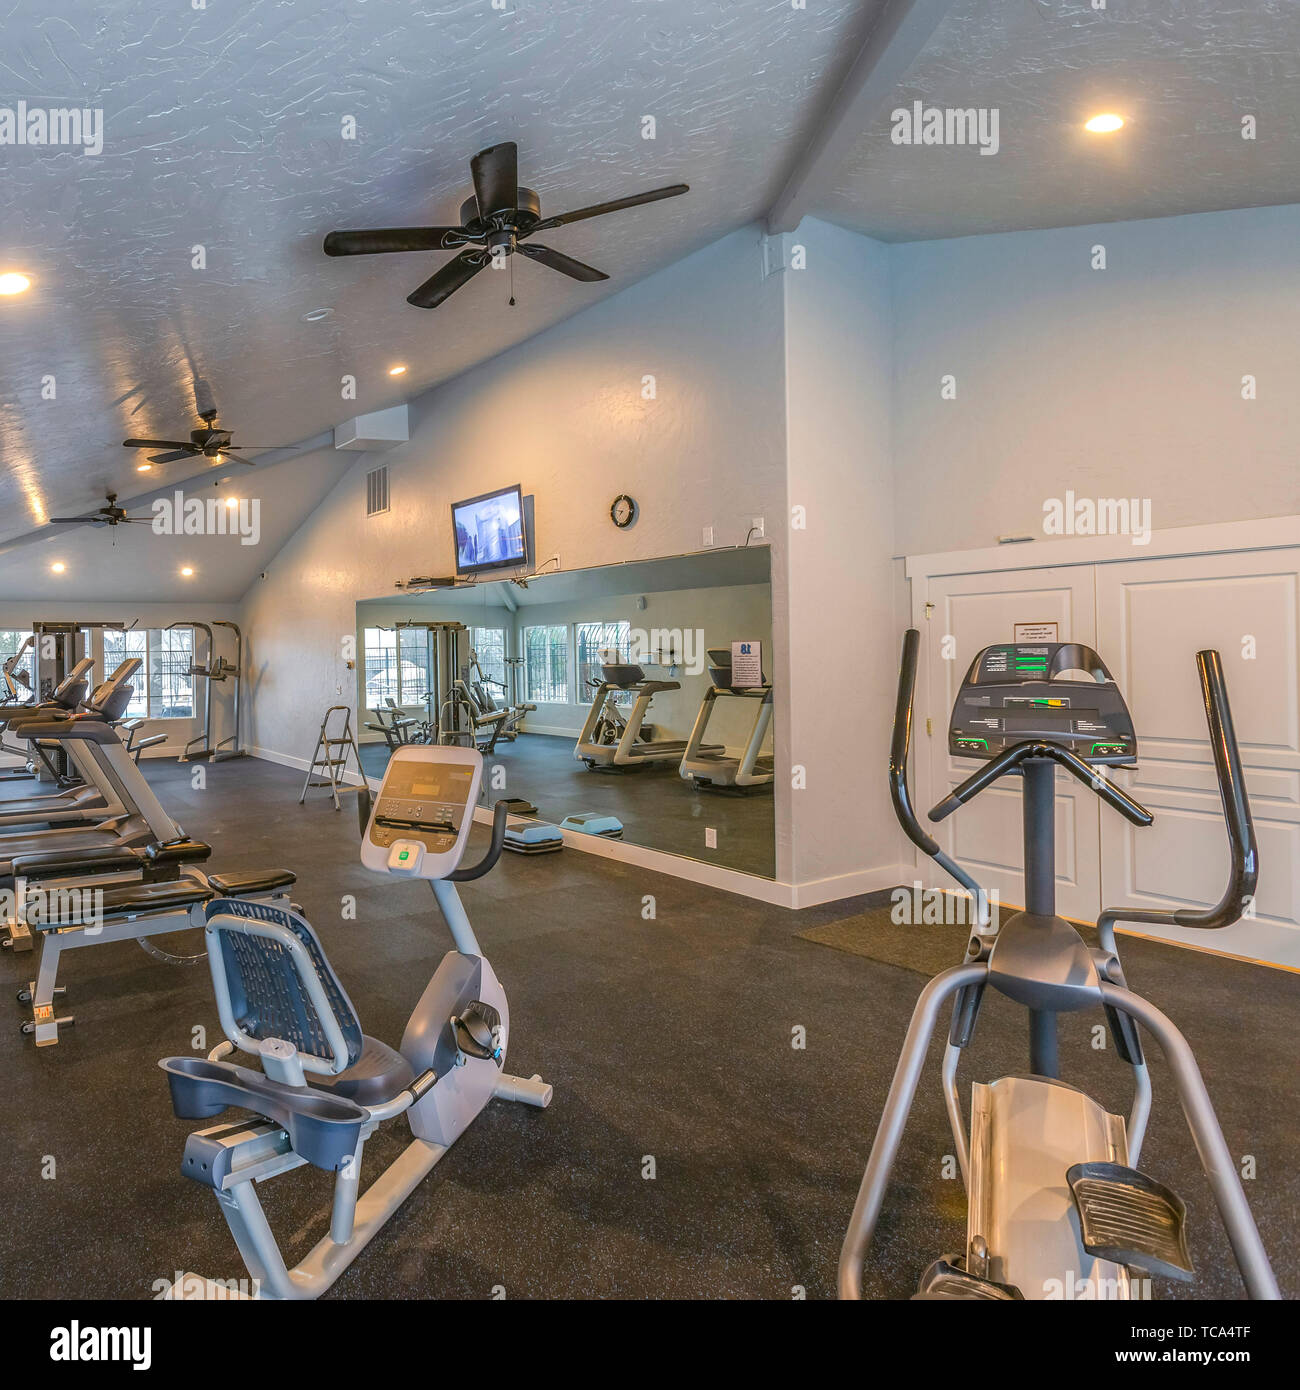 Square Interior of a spacious fitness gym with various exercise equipment Stock Photo